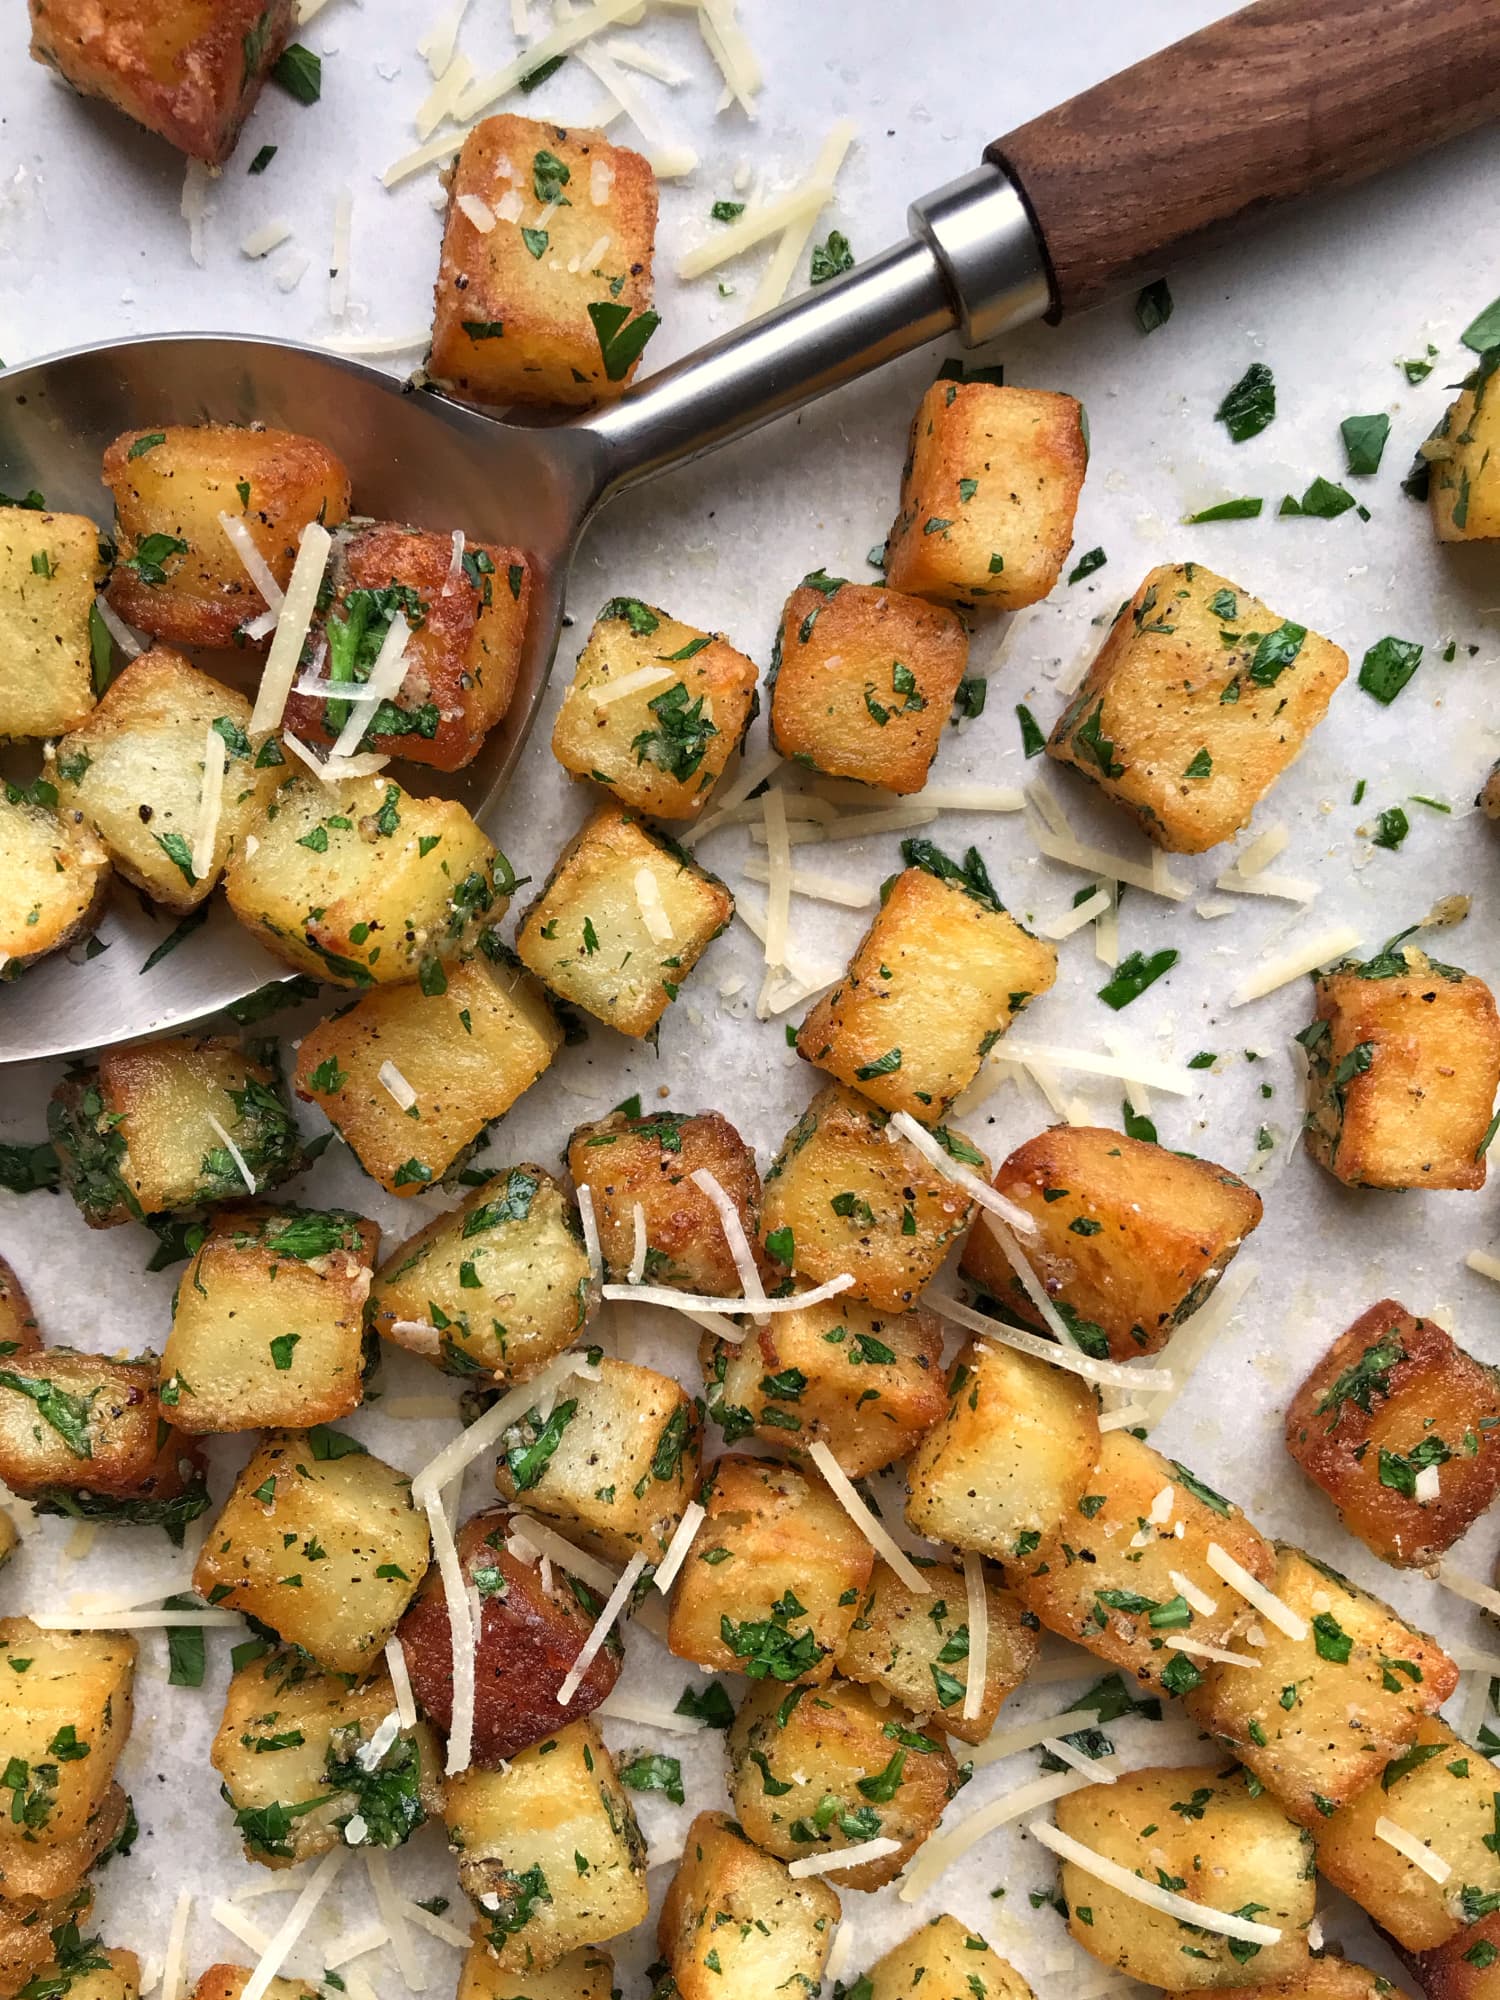 Pommes Persillade (Potatoes with Parsley and Garlic)